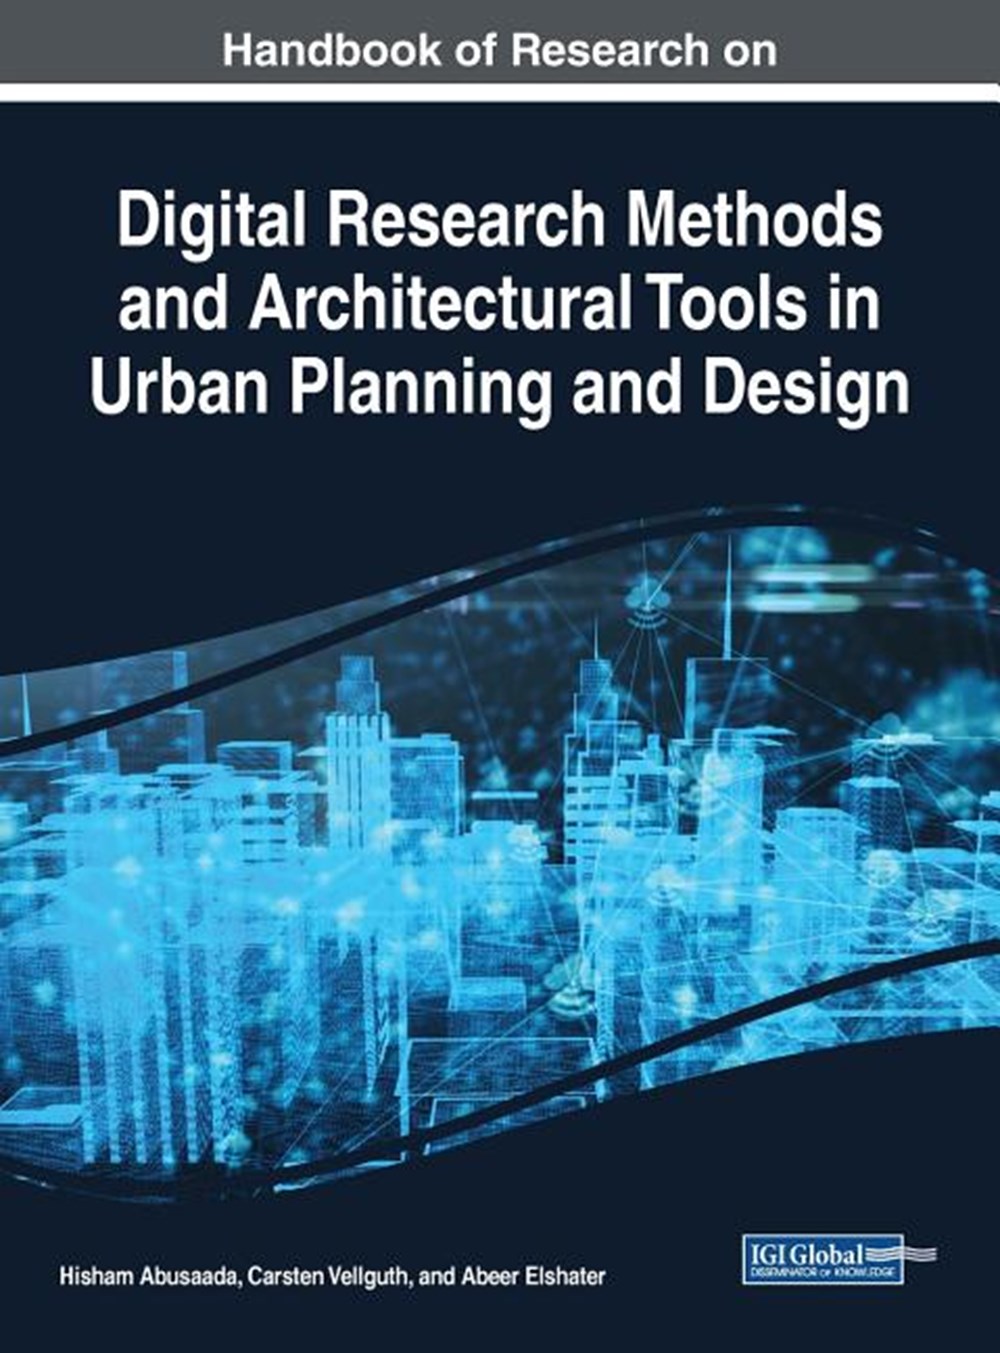 Handbook of Research on Digital Research Methods and Architectural Tools in Urban Planning and Desig